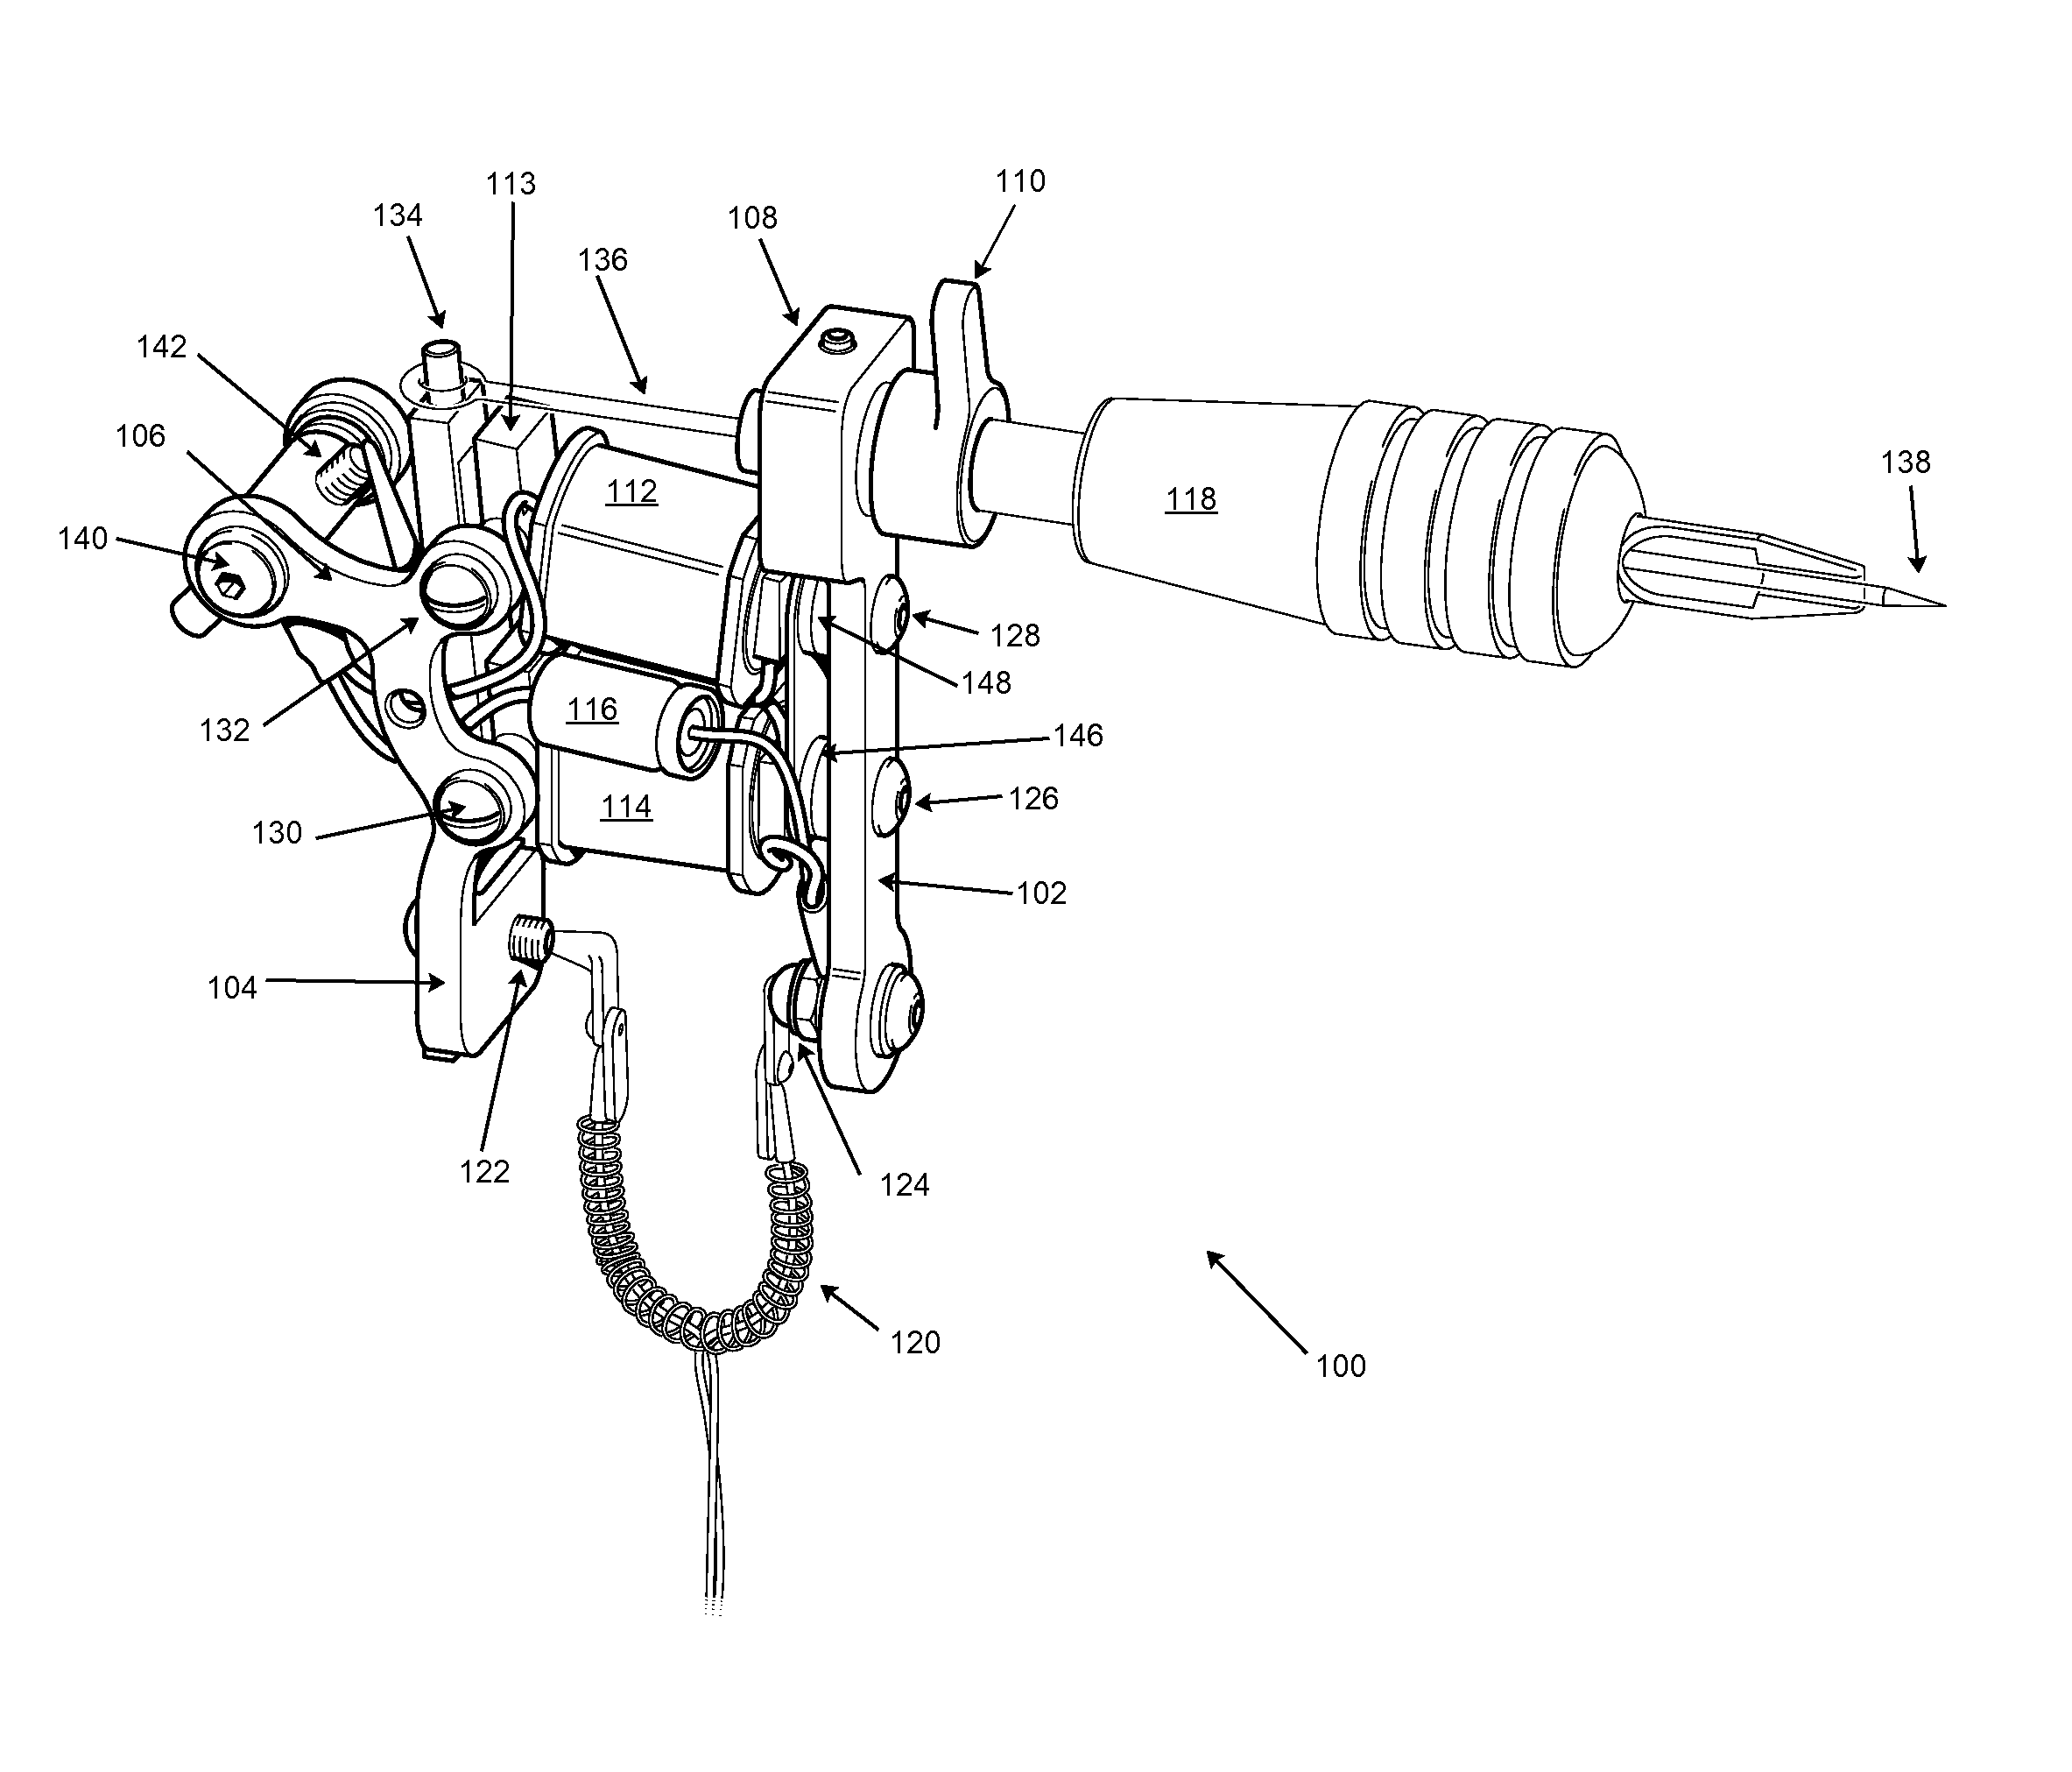 Electromagnetic support coil and subframe